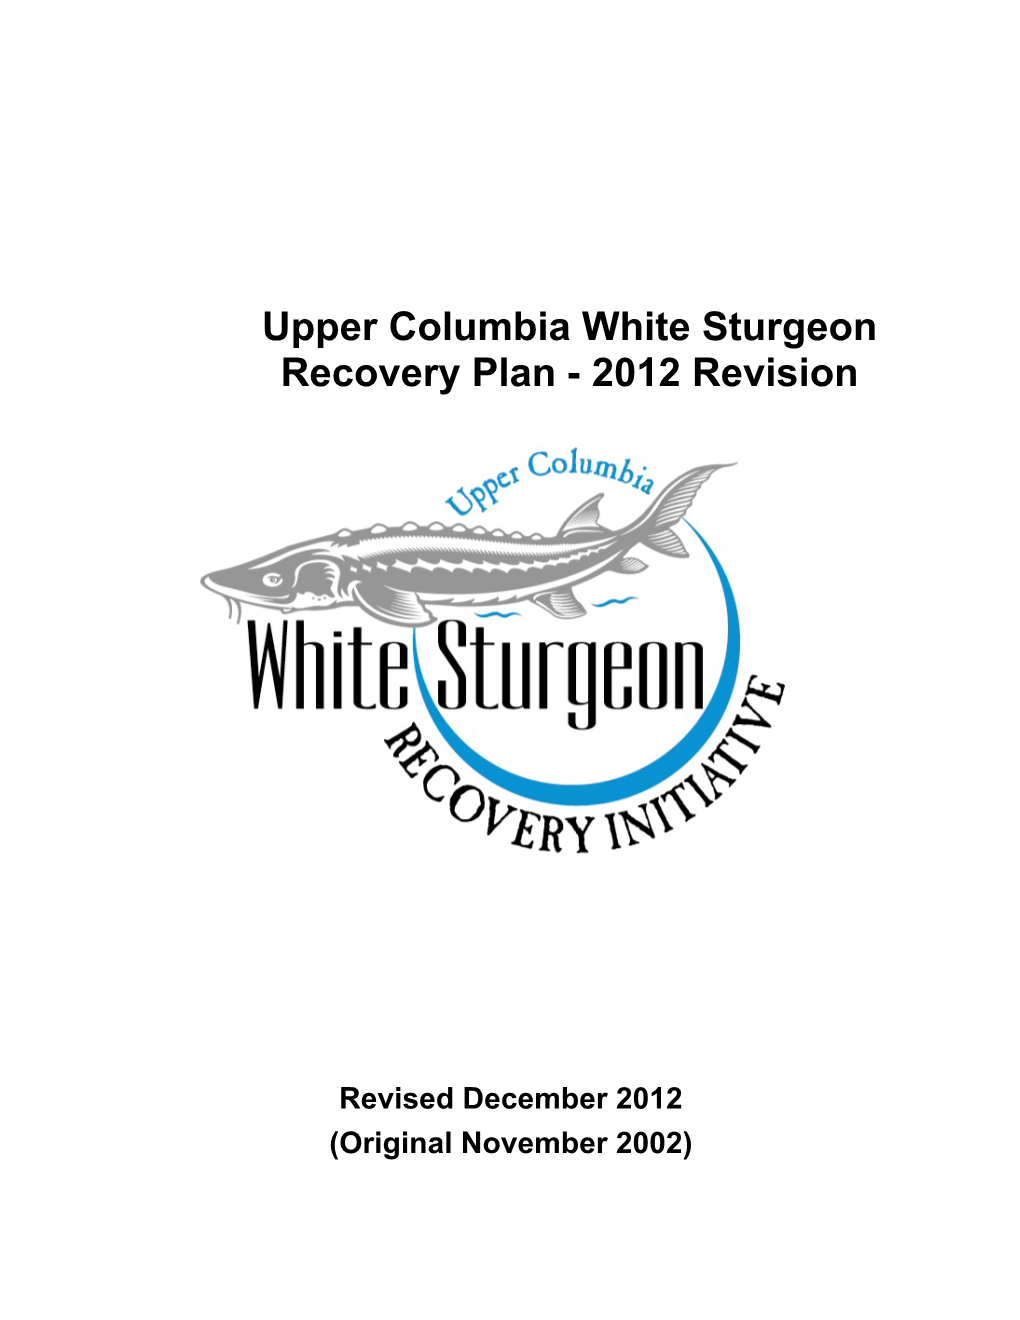 Upper Columbia White Sturgeon Recovery Plan - 2012 Revision